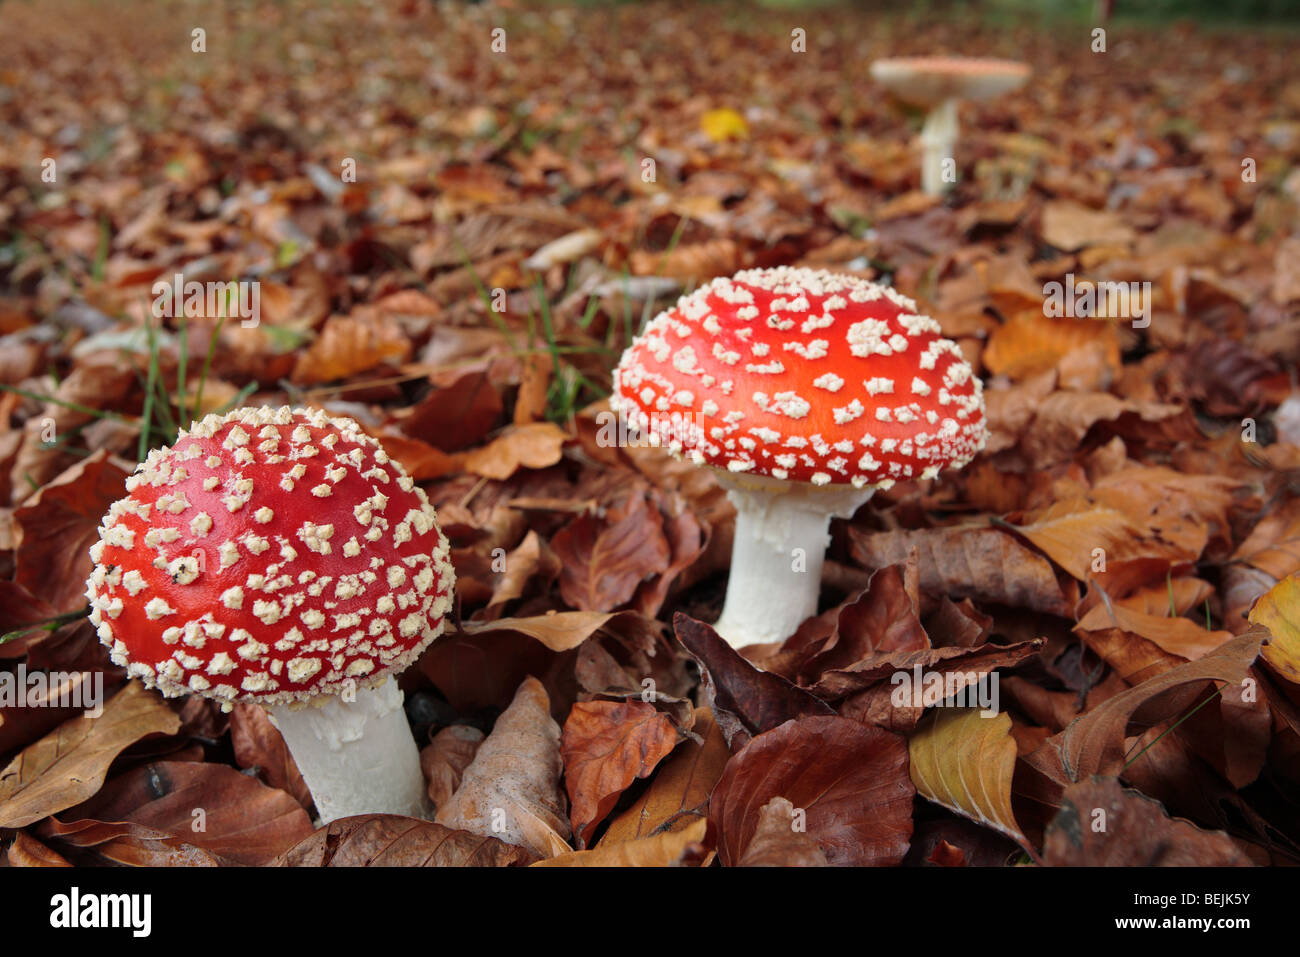 Fly agaric toadstools (Amanita muscaria) among autumn leaves Stock Photo